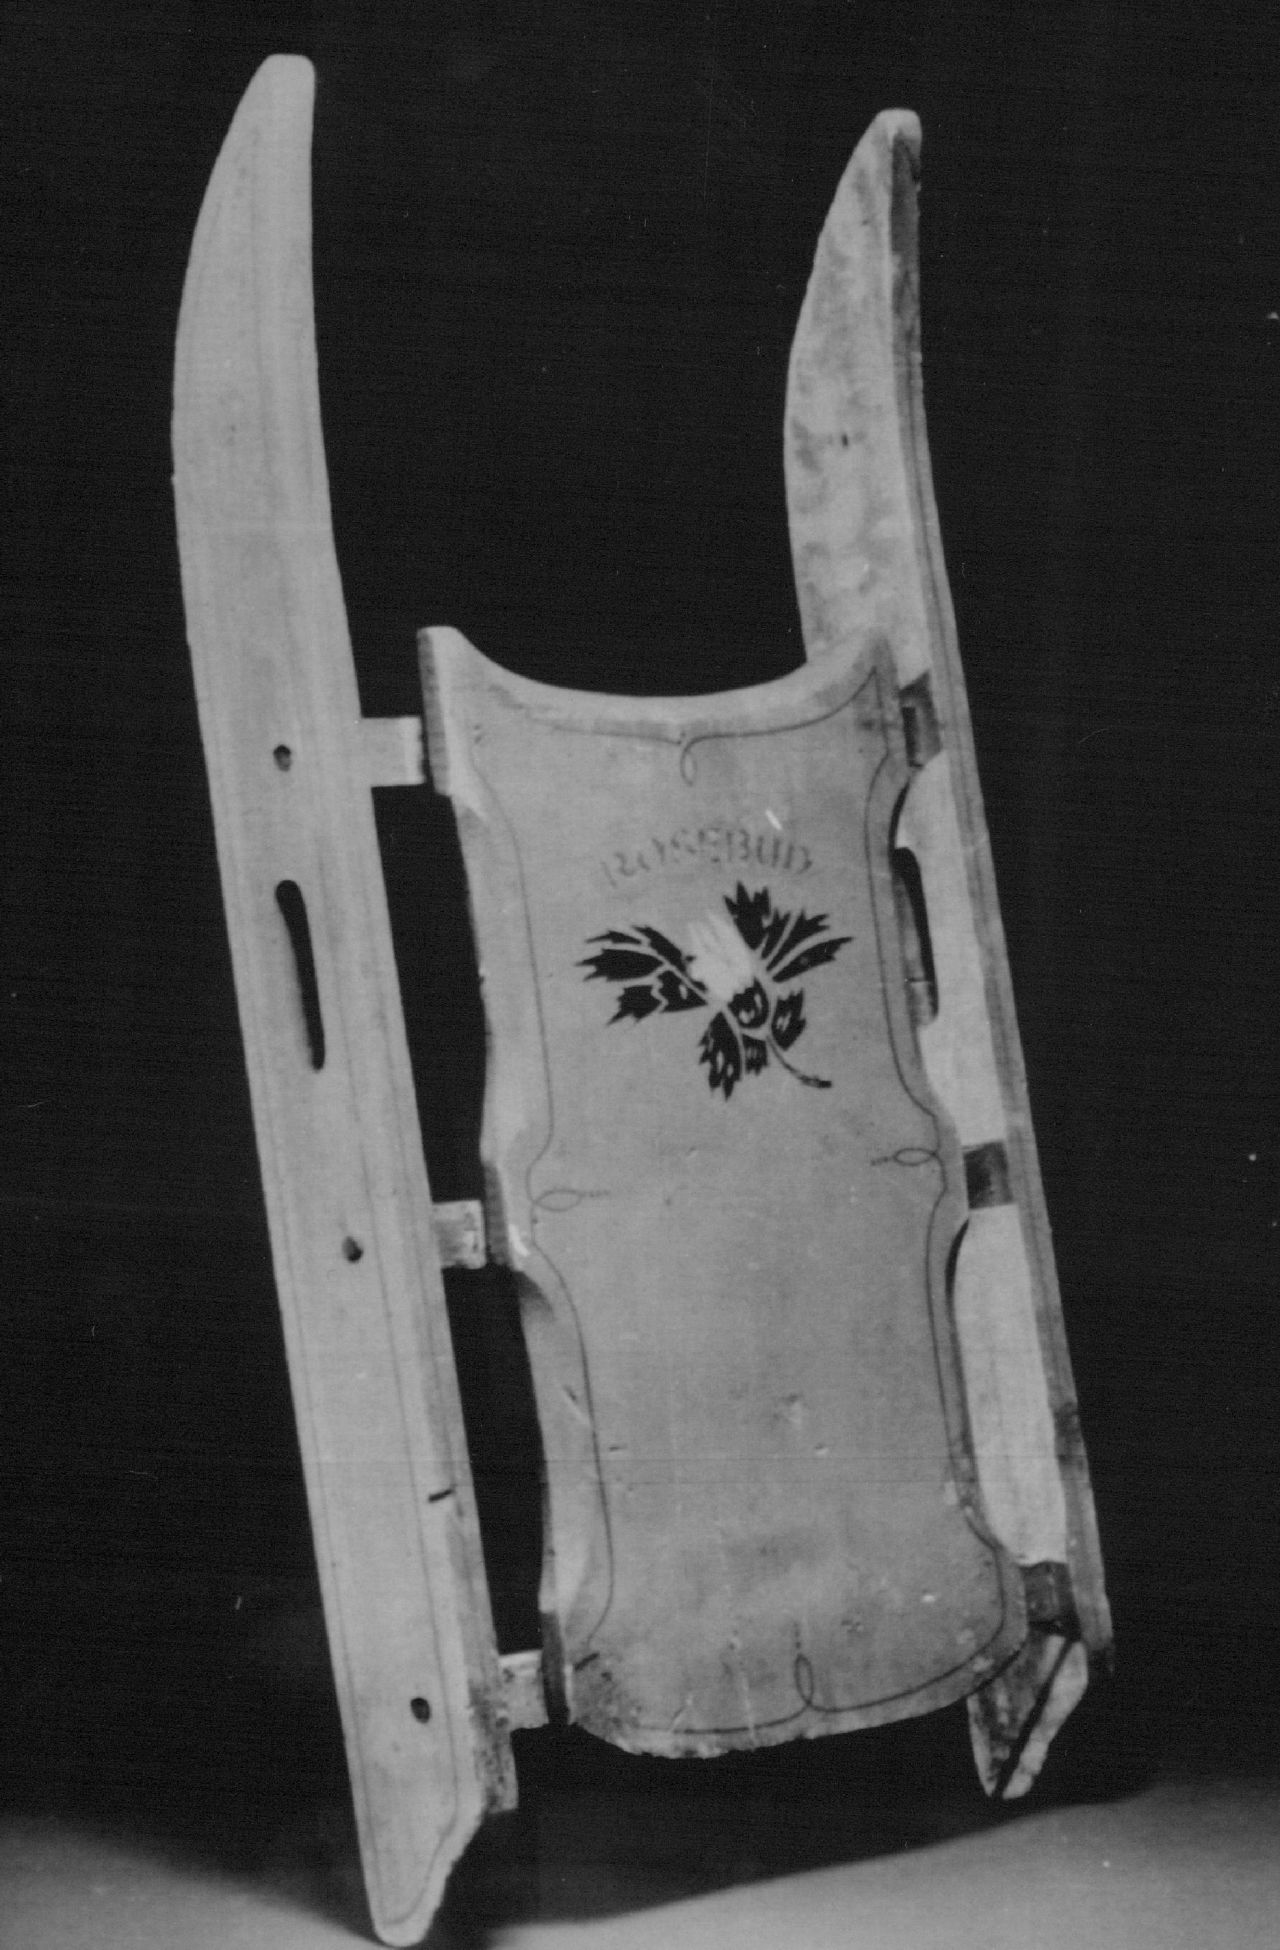 A balsa sled made for "Citizen Kane," photographed in 1982.